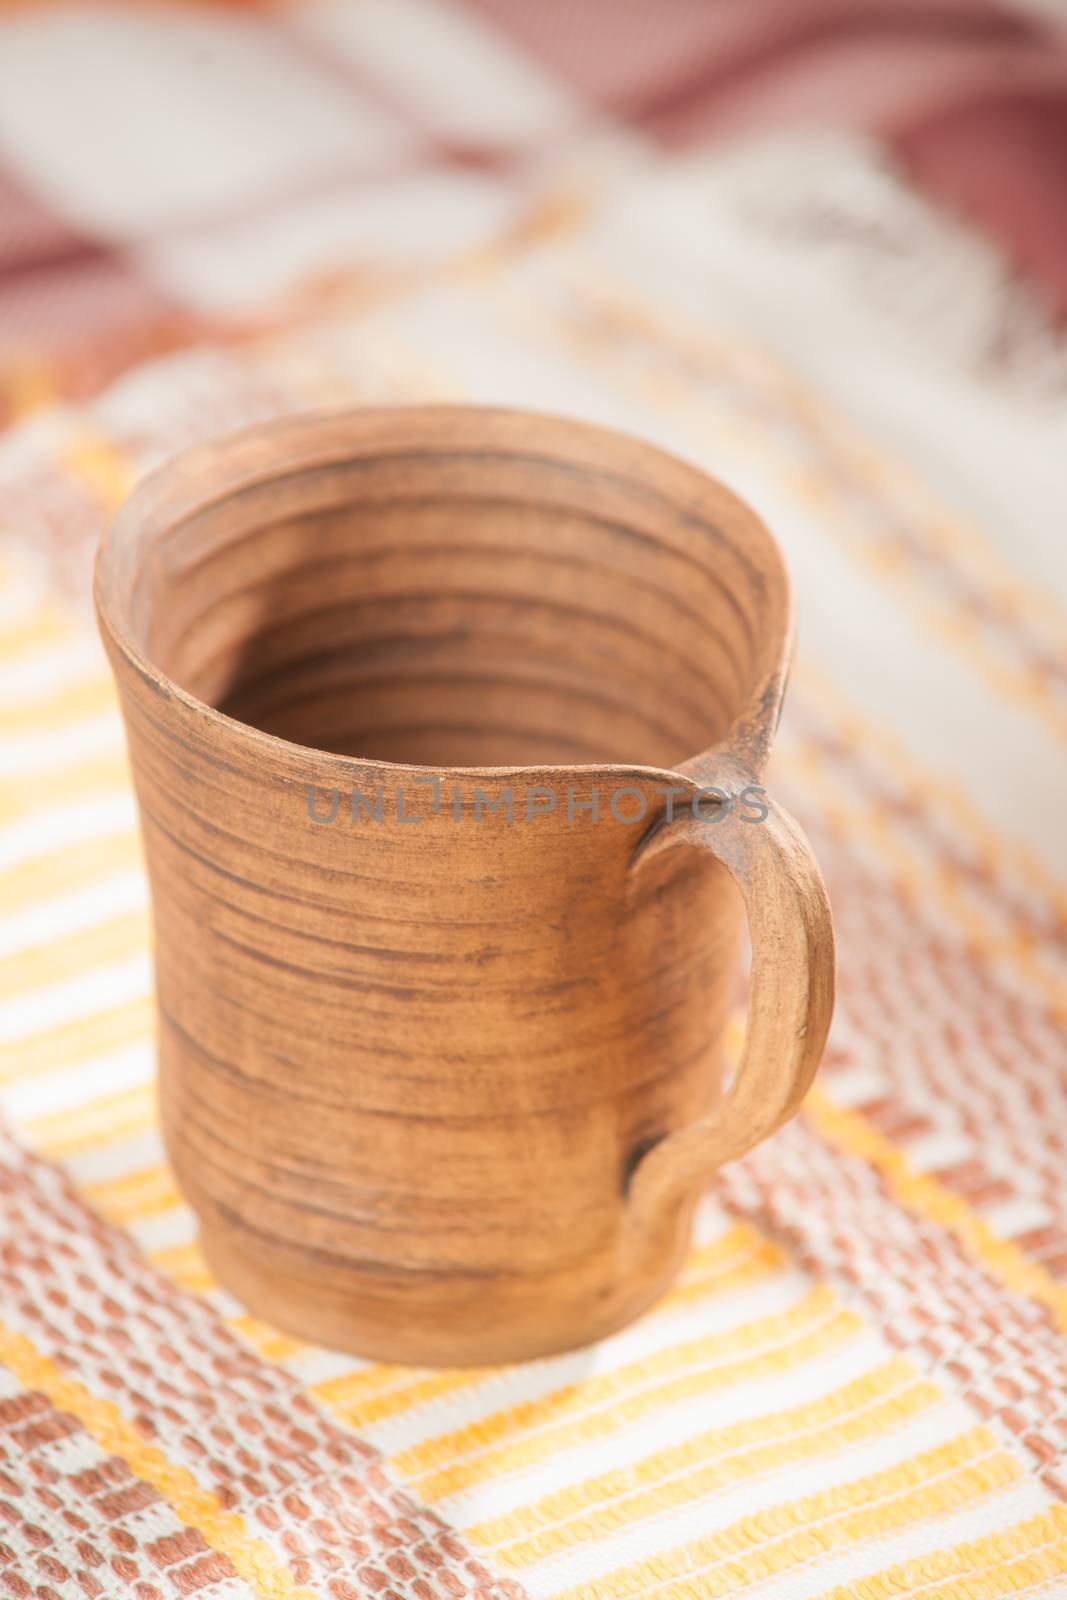 Traditional handcrafted mug - perfect for tea, coffee or beer